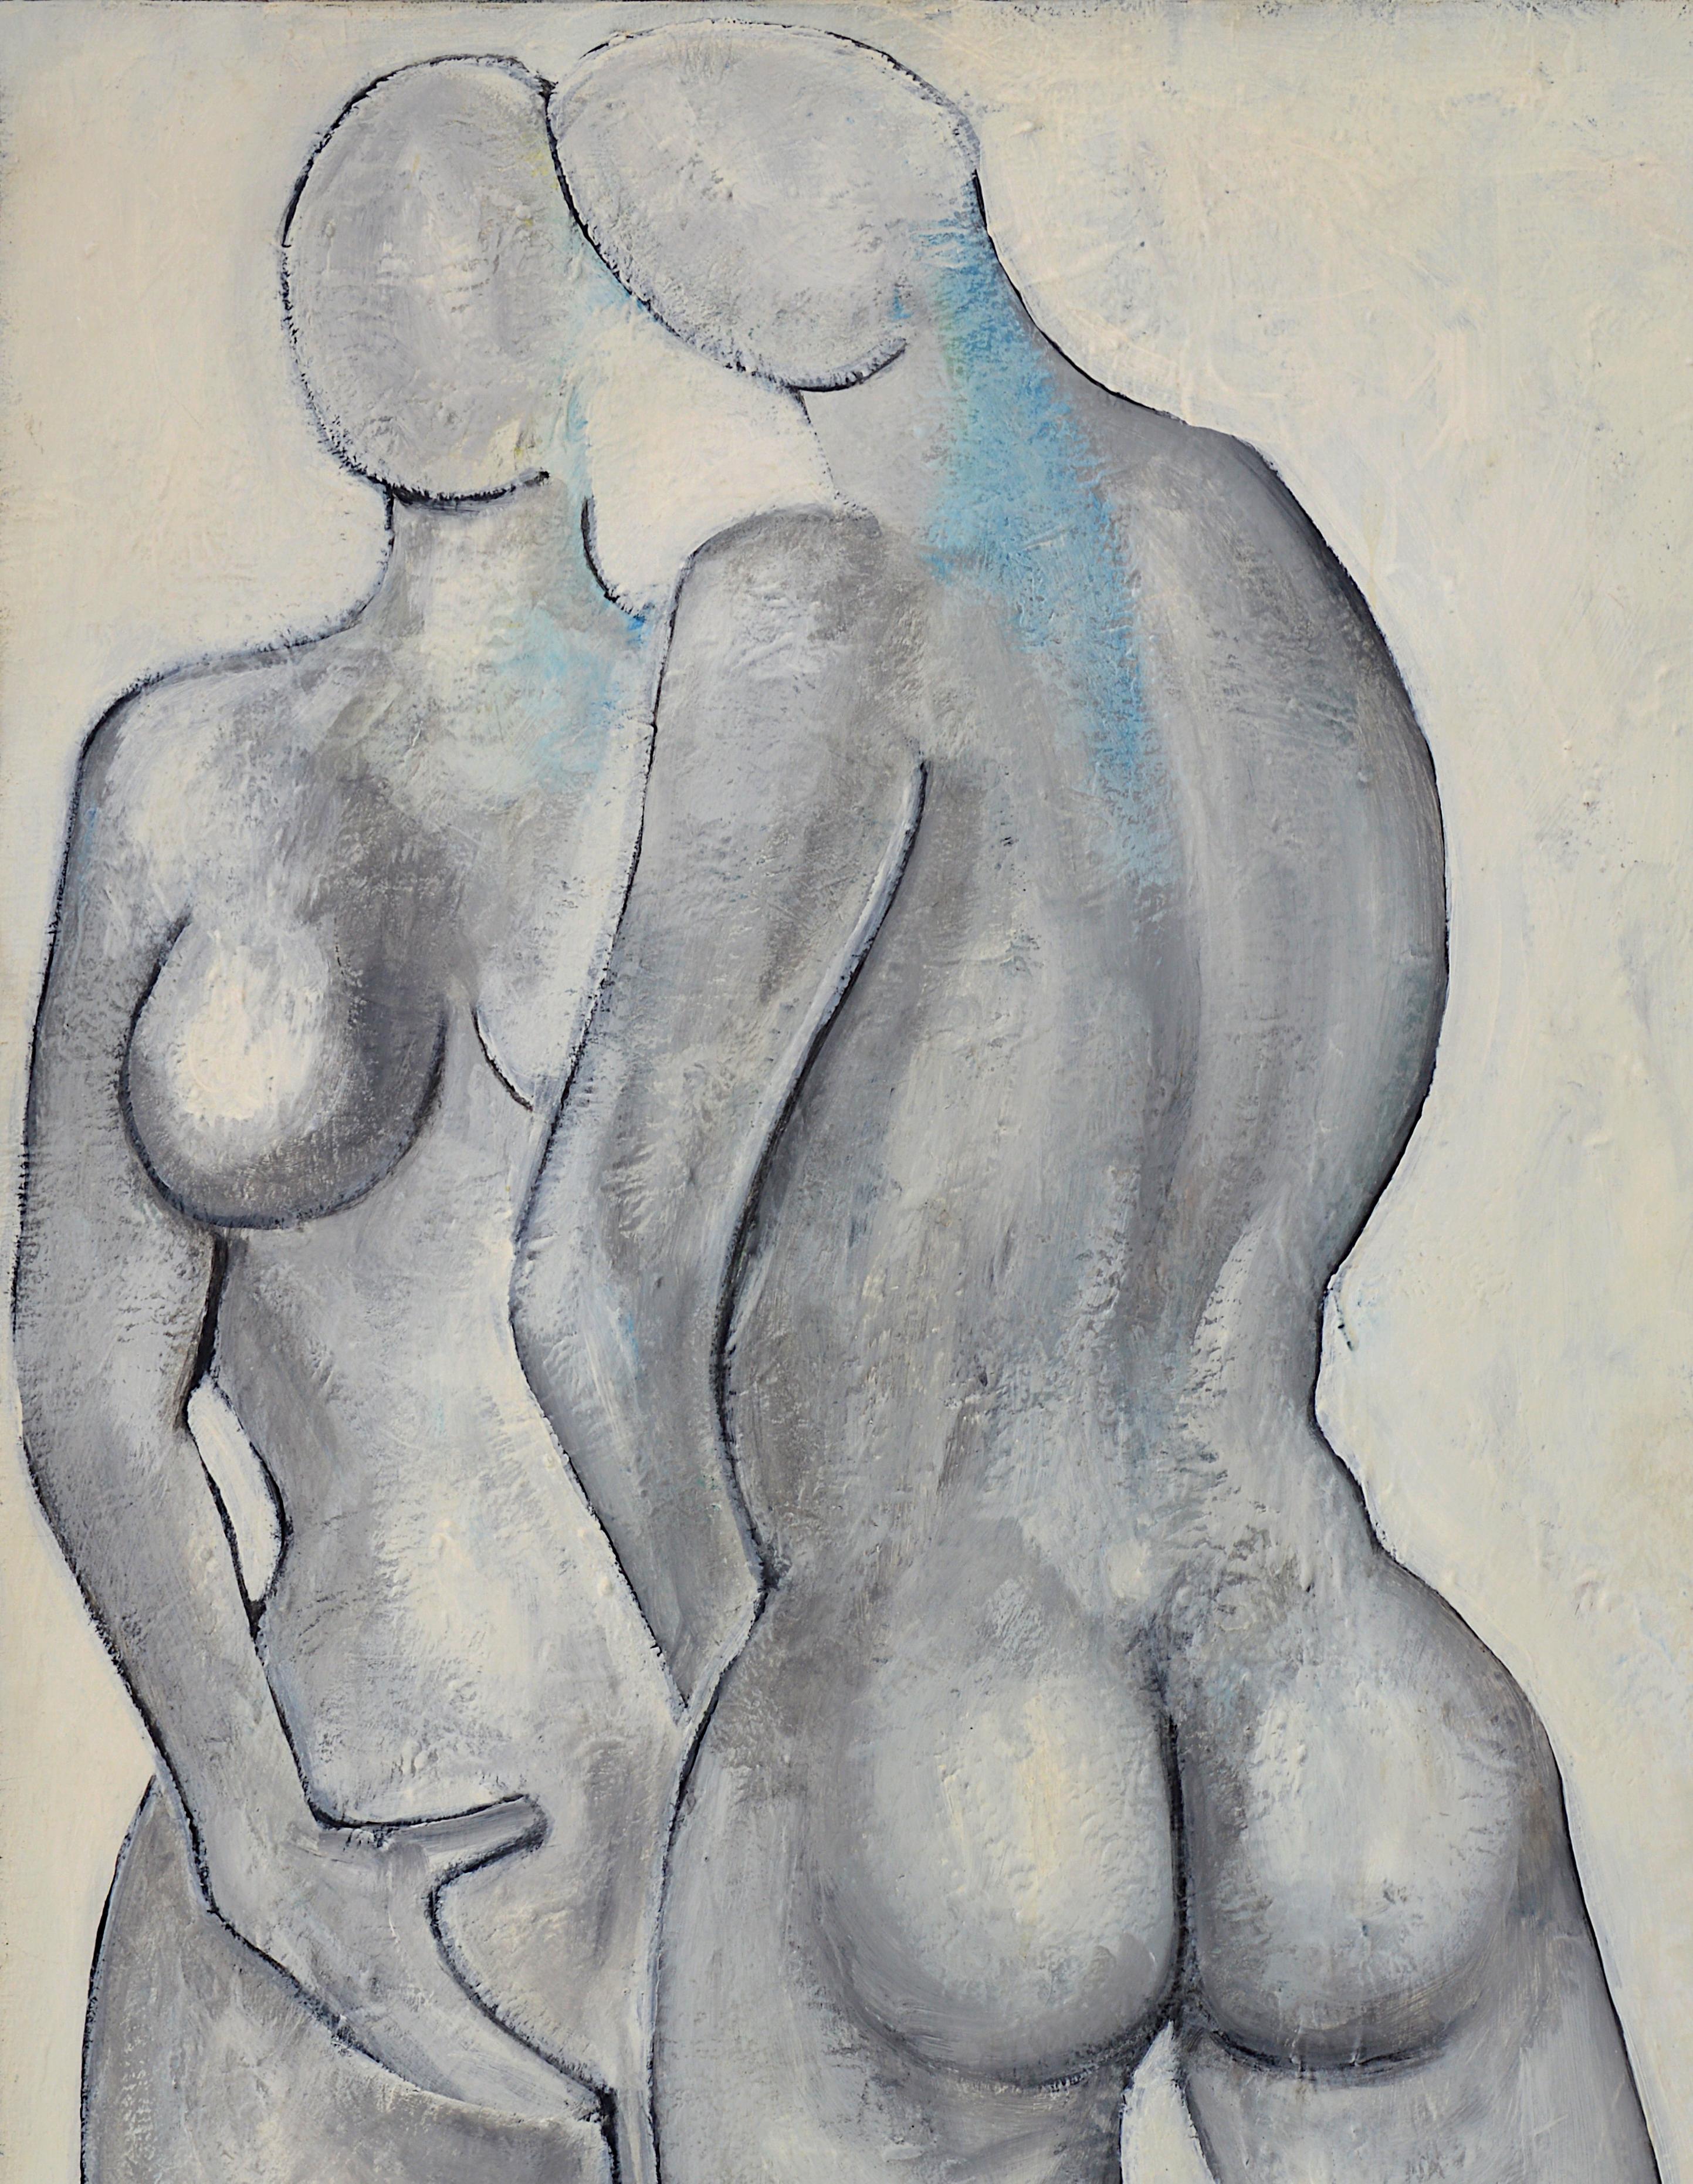 Dominique PERY, Marianne, Oil on canvas 1987 - Neo-Expressionist Painting by Dominique Pery